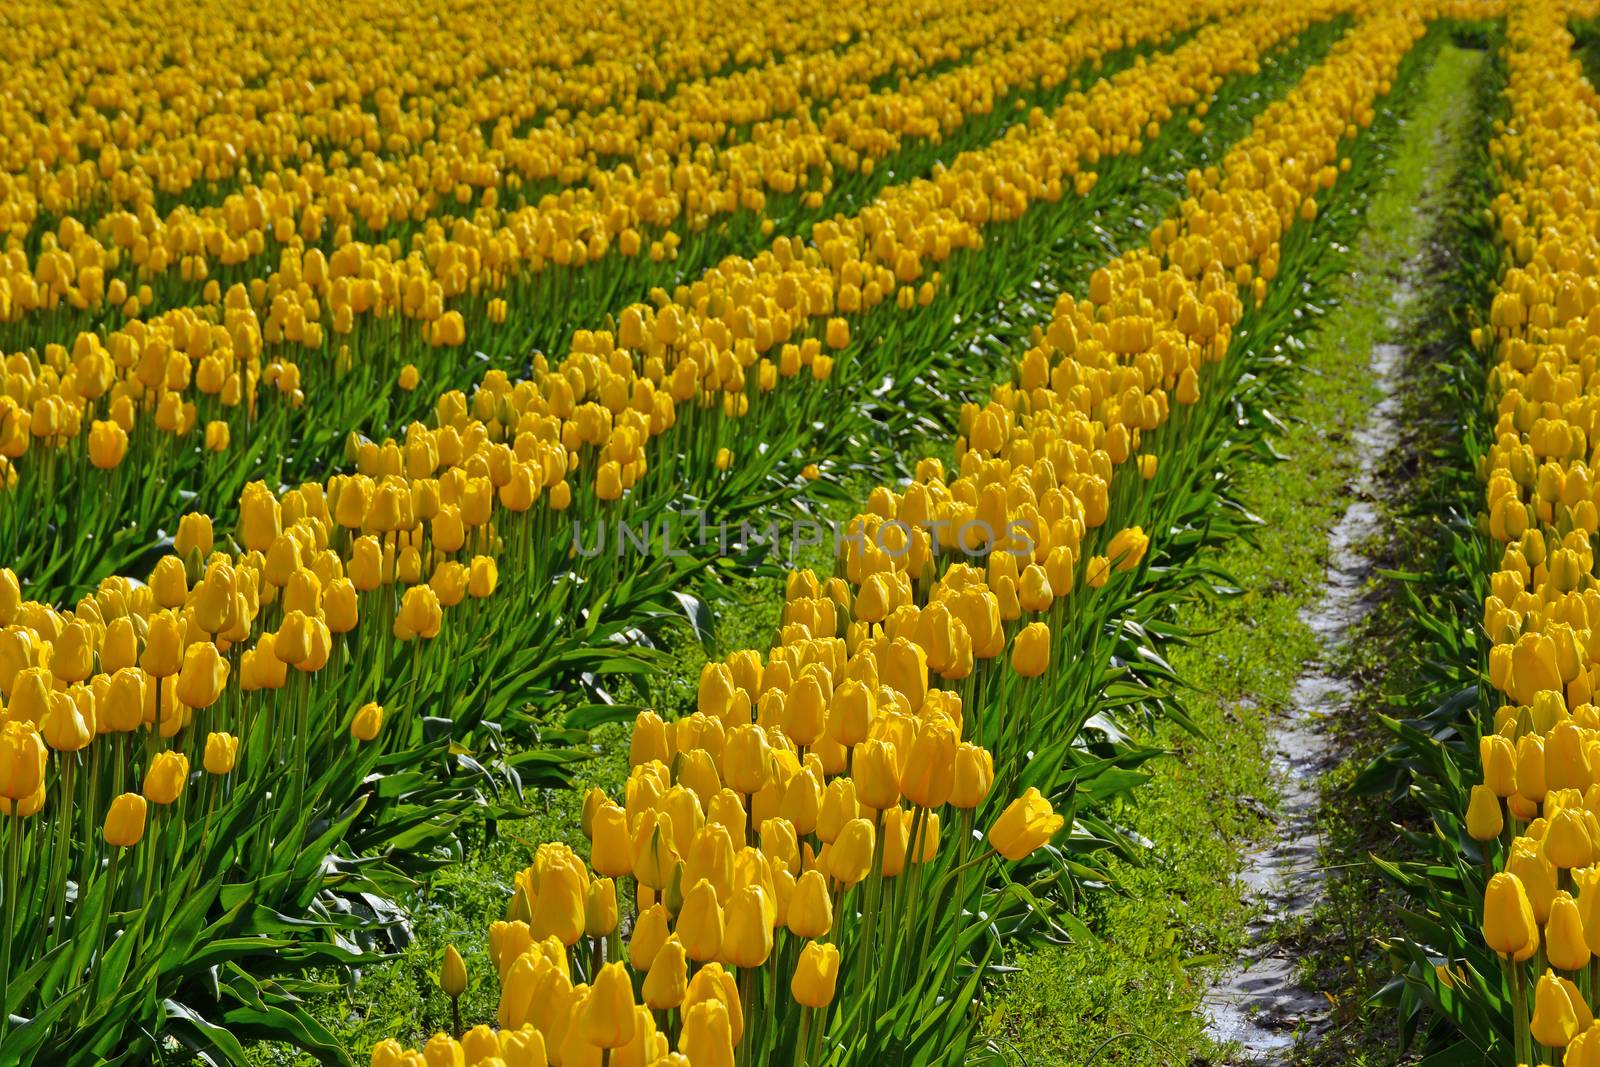 Rows of beautiful yellow spring tulips